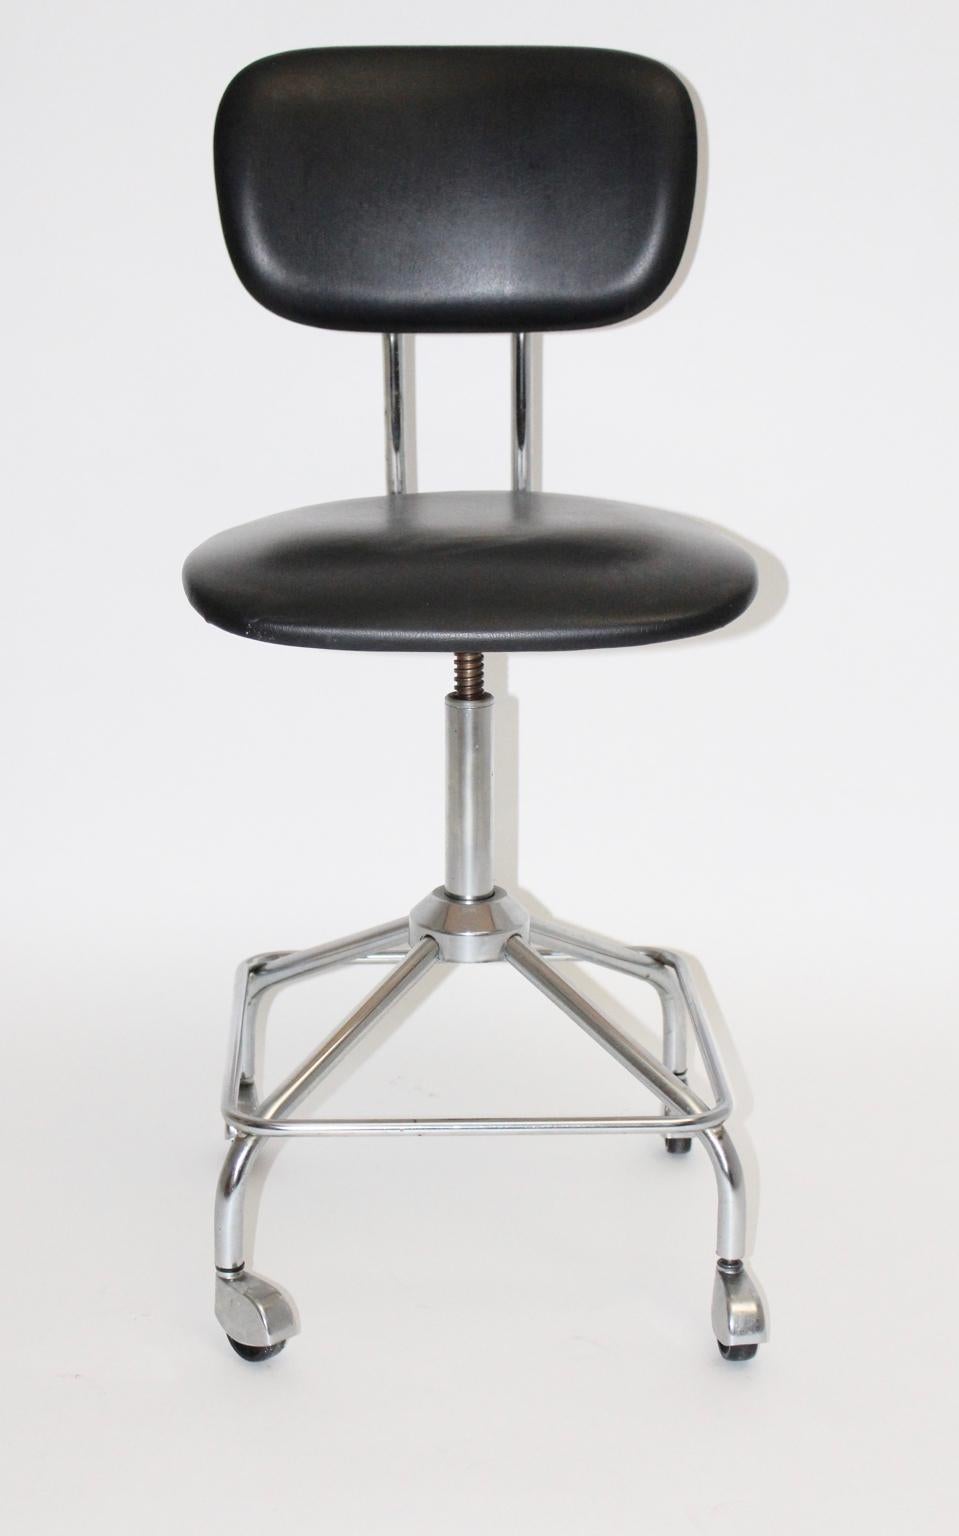 Mid Century Modern vintage desk chair designed by Egon Eiermann. The desk chair features a chromed metal base with 4 wheels. Also the seat and back, made of plywood, were covered with black faux leather. The seat is adjustable from up to down.
The